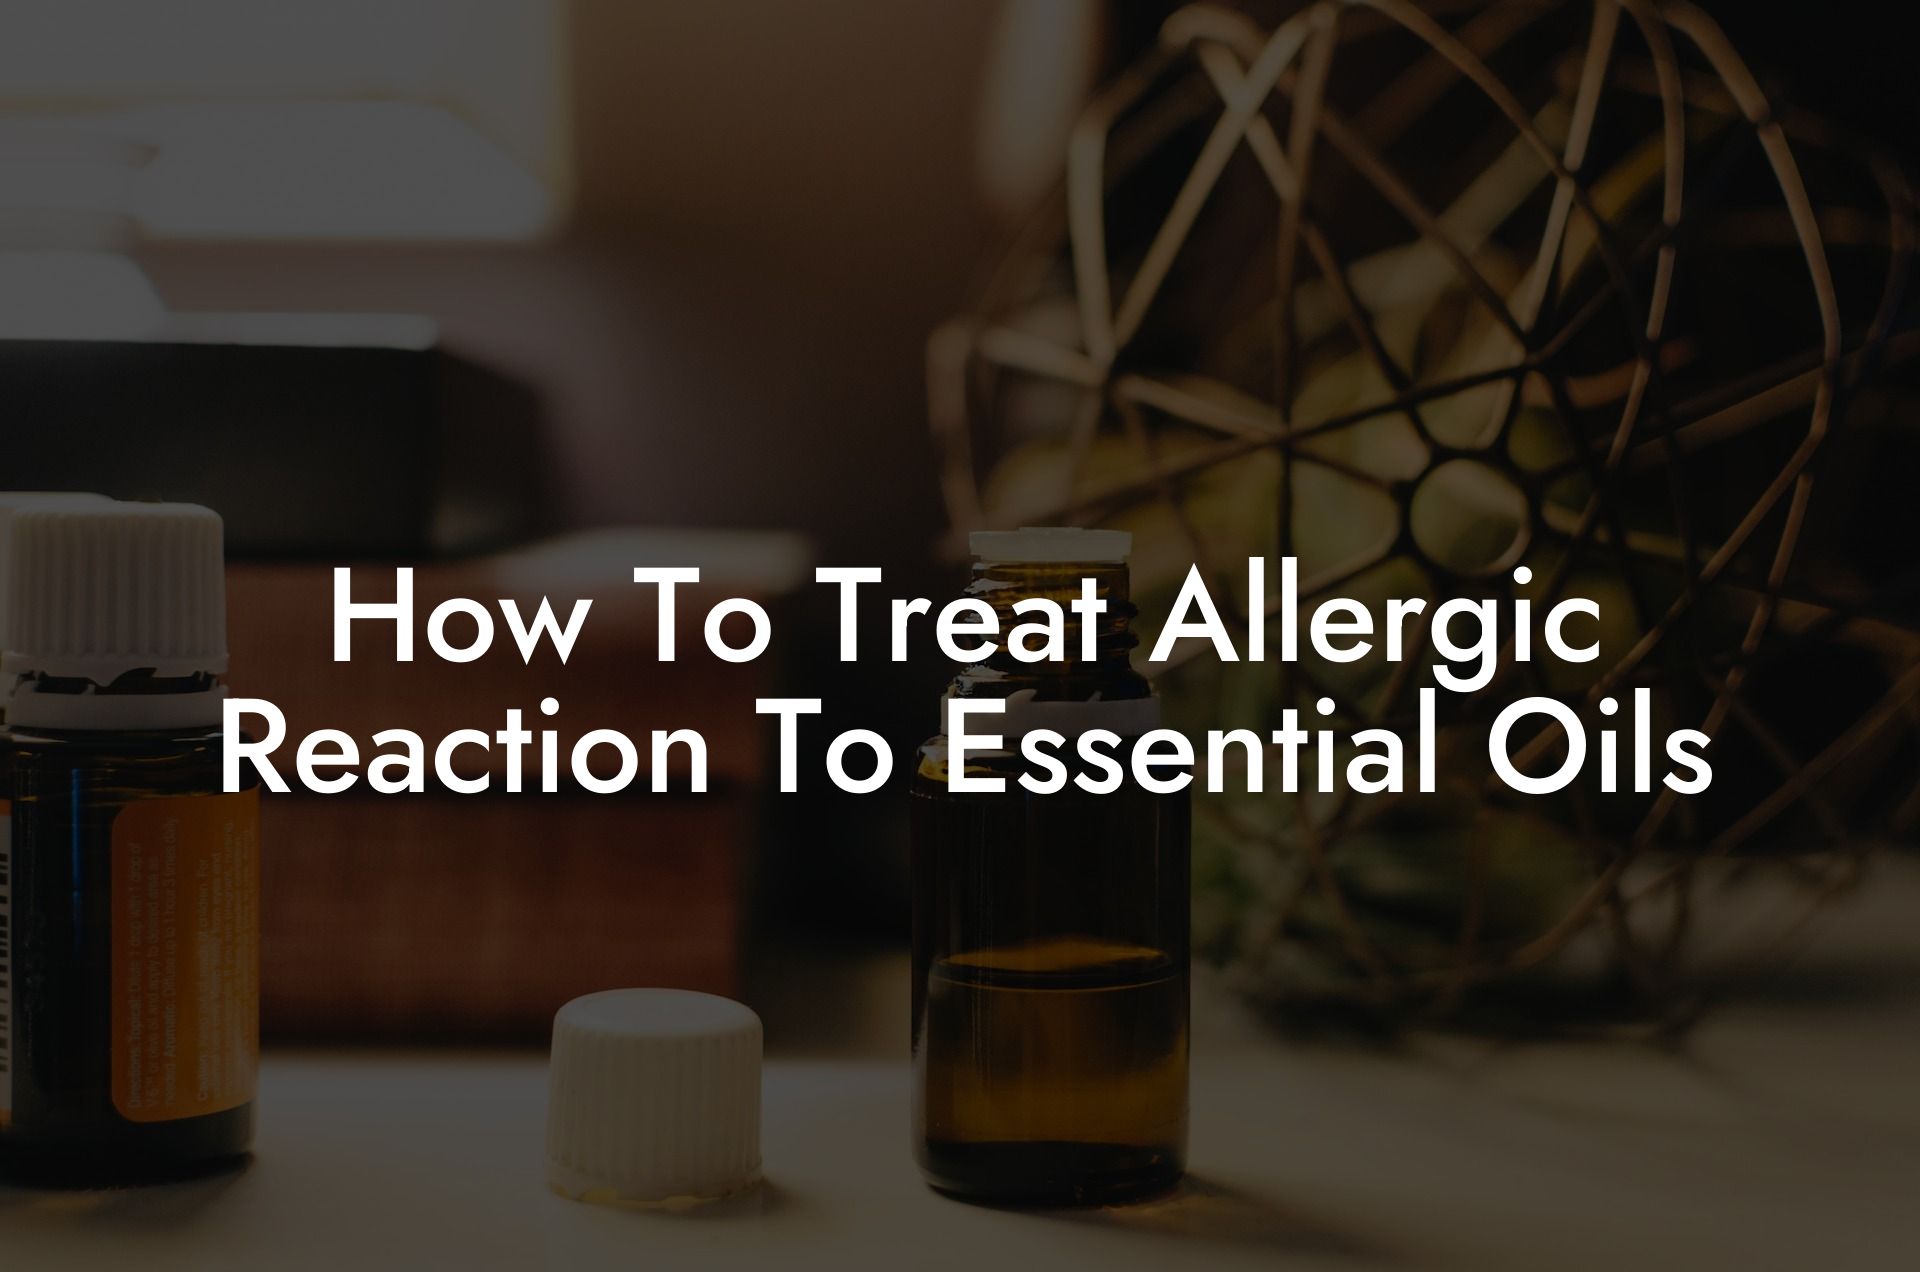 How To Treat Allergic Reaction To Essential Oils